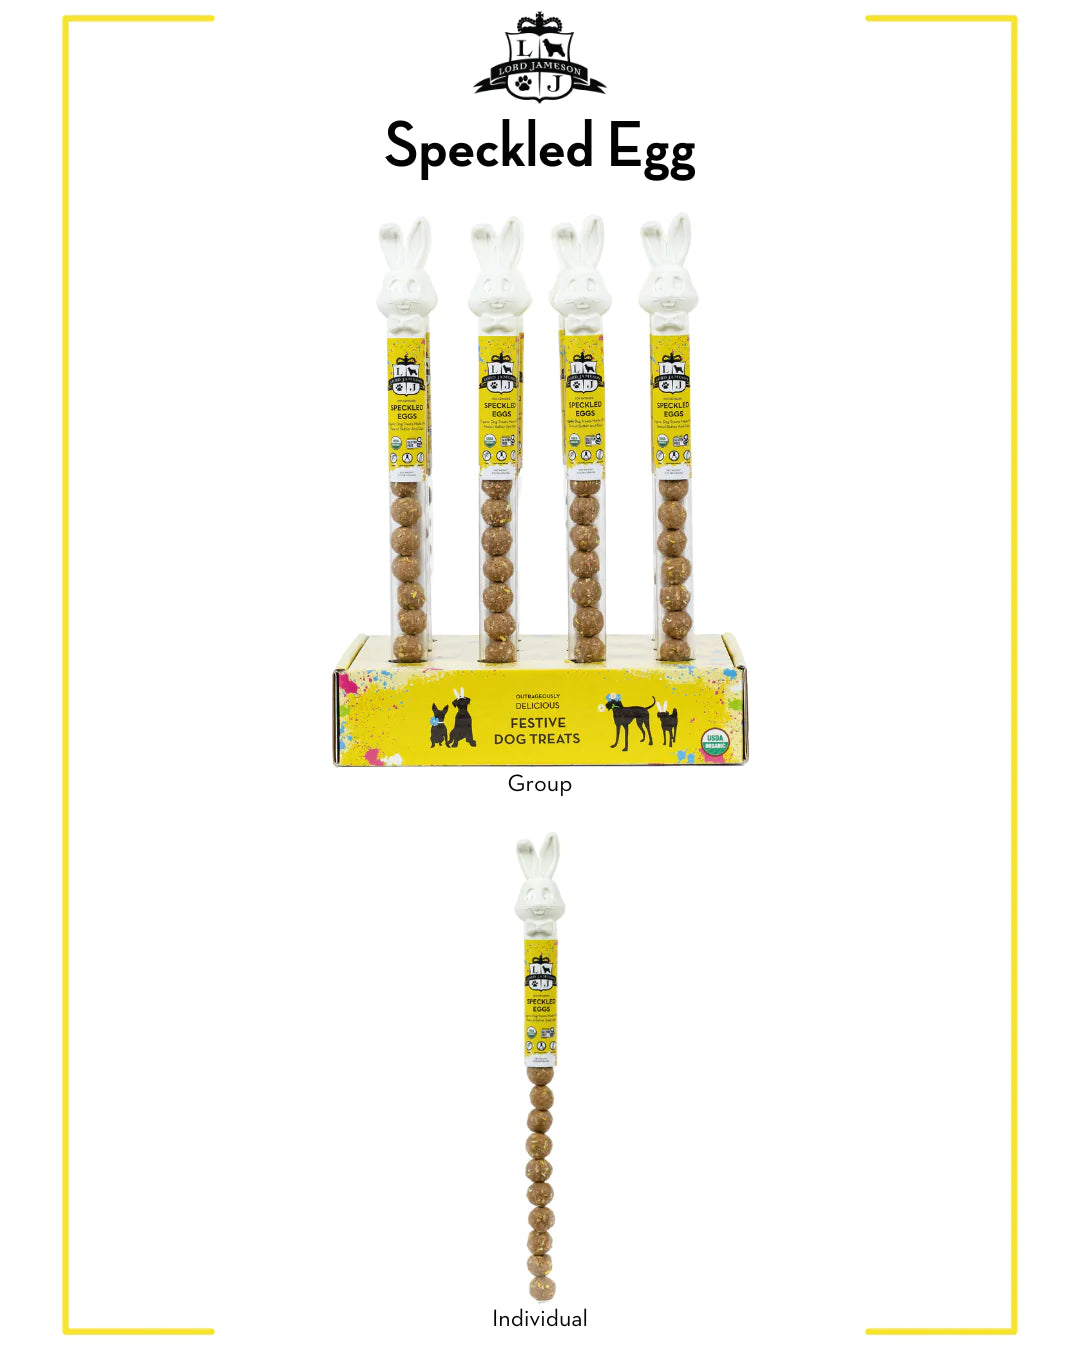 Lord Jameson Speckled Eggs